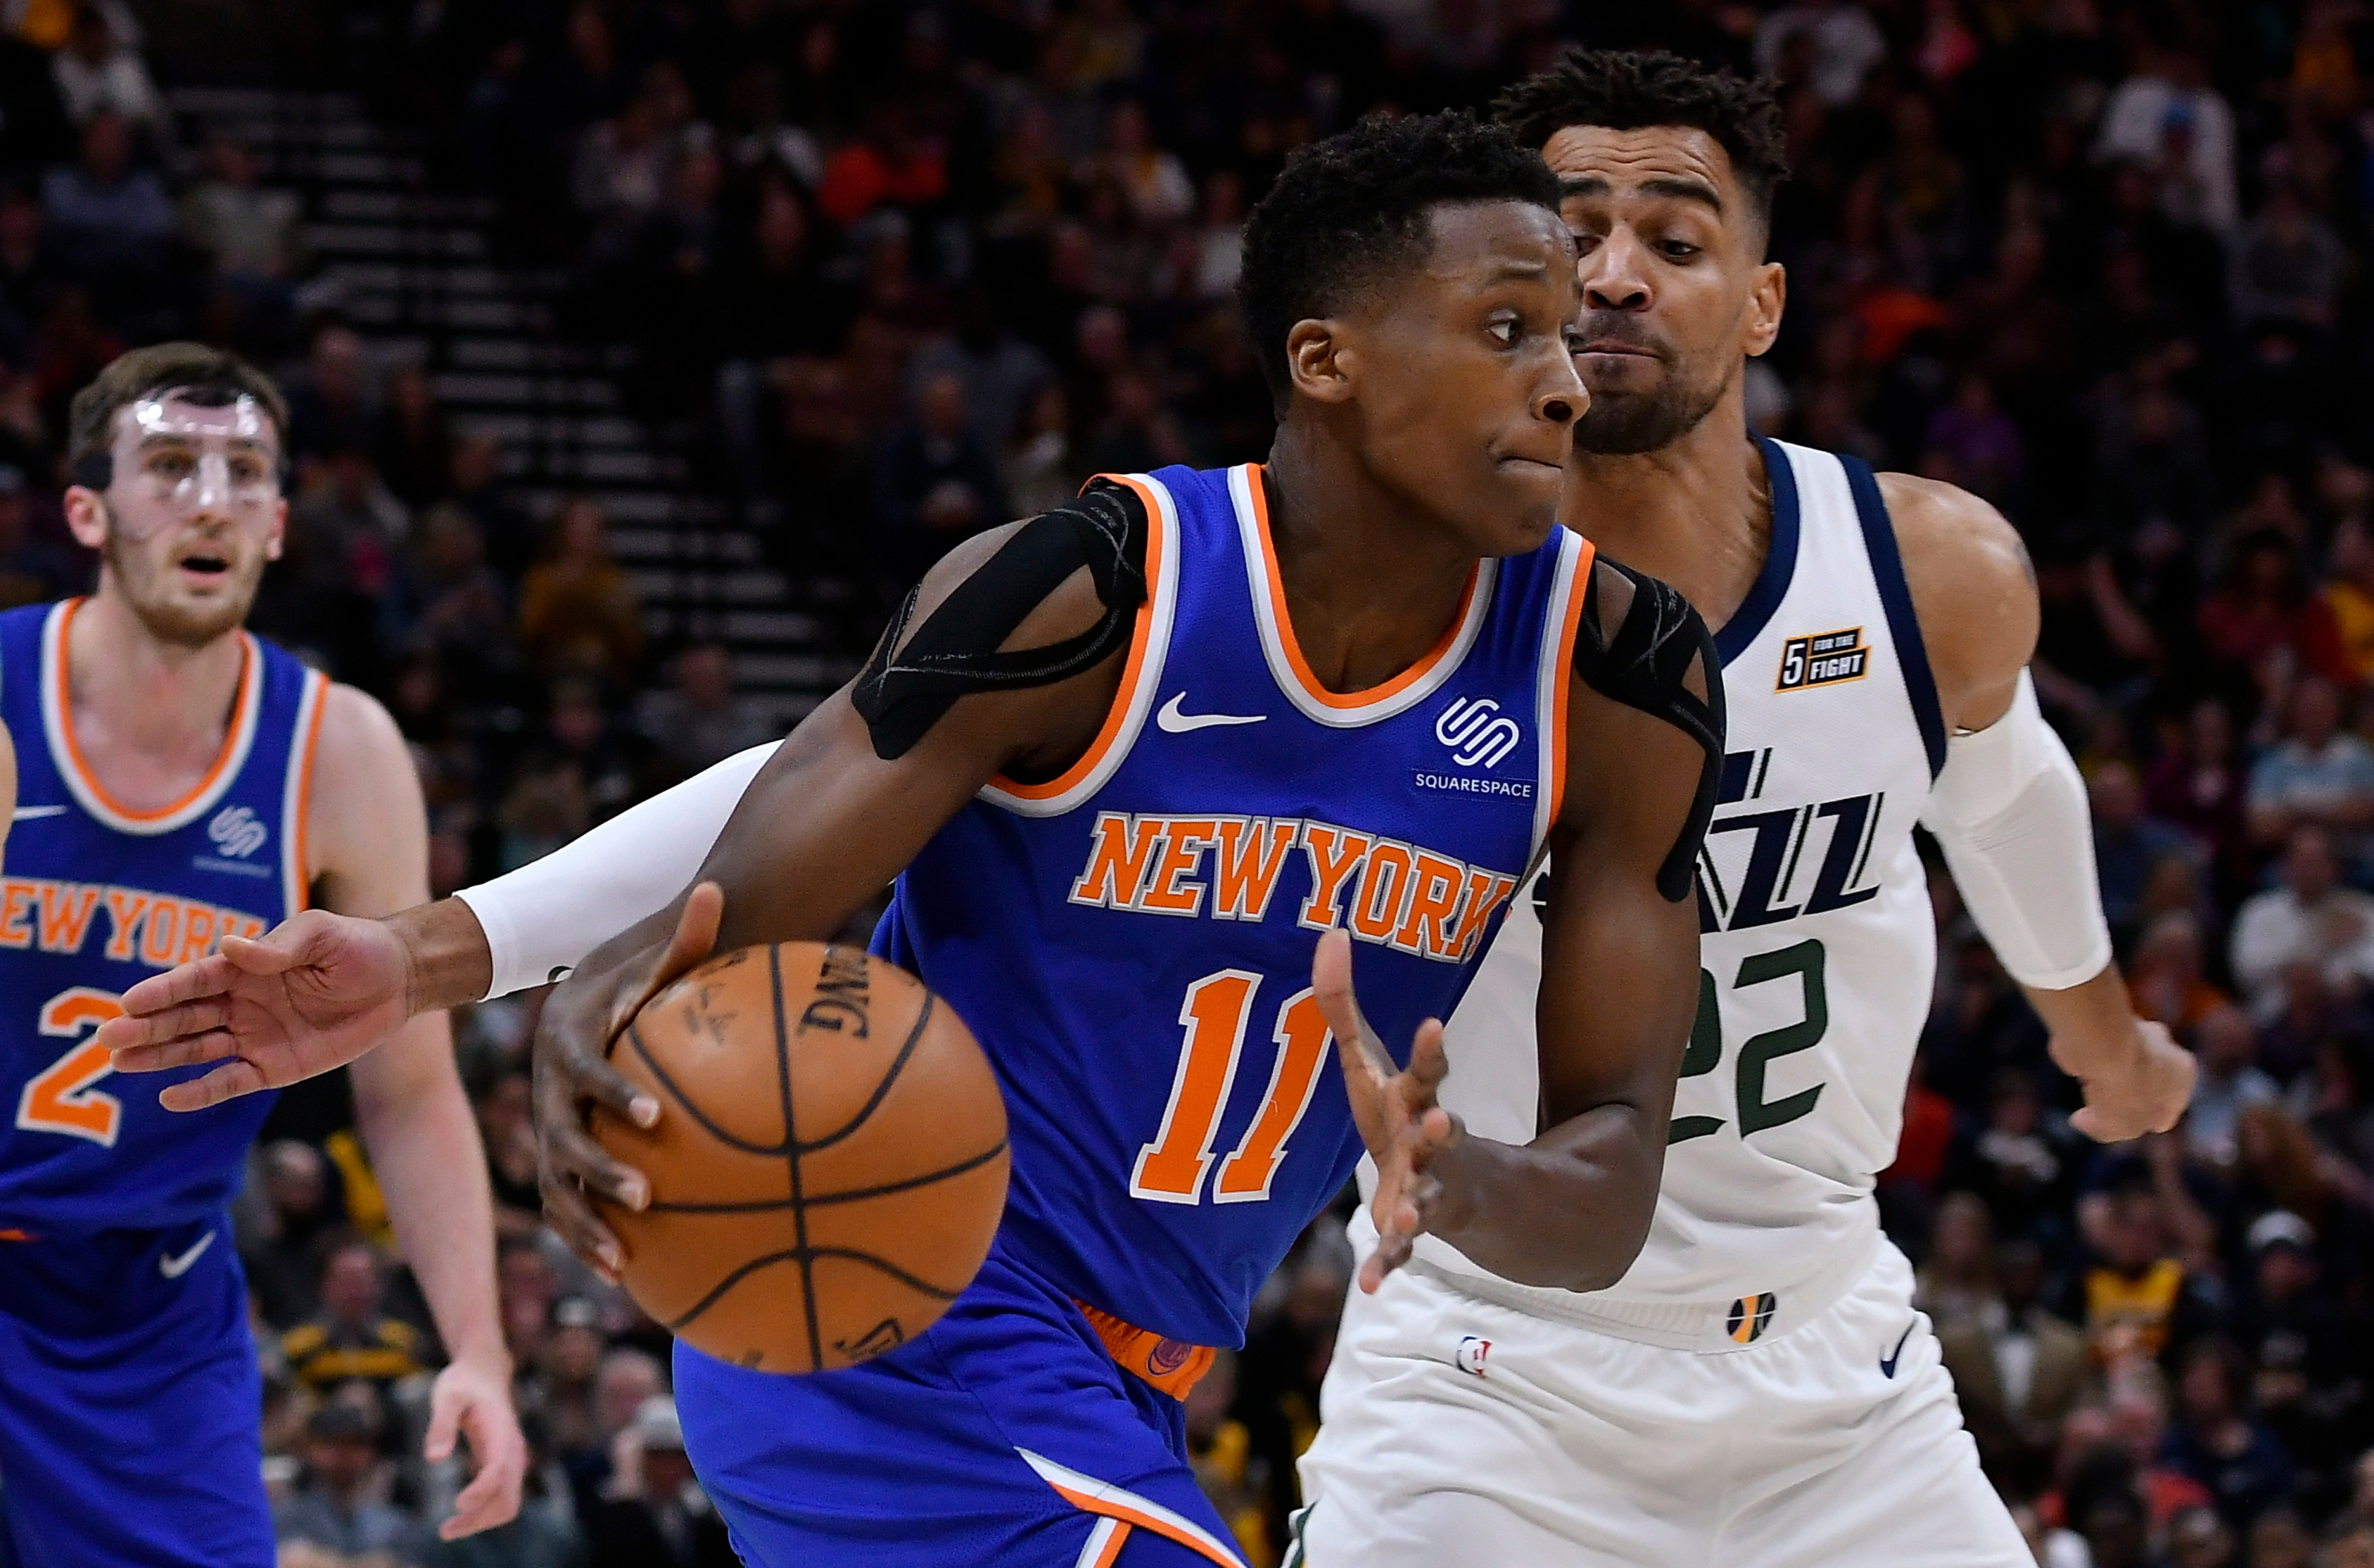 Frank Ntilikina has come to feel at home with the Knicks and New York this  season. That matters. - The Athletic